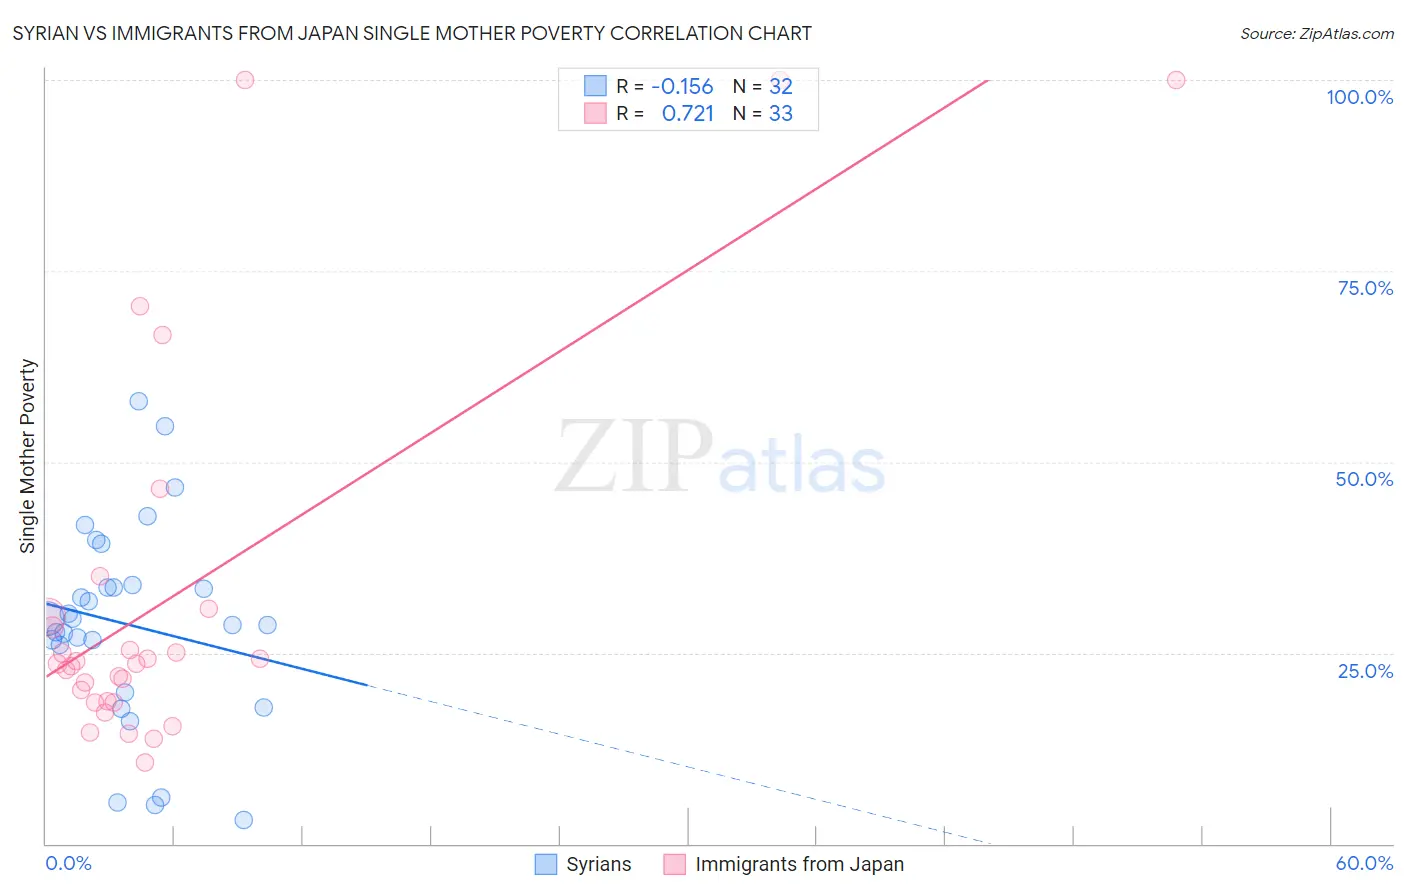 Syrian vs Immigrants from Japan Single Mother Poverty